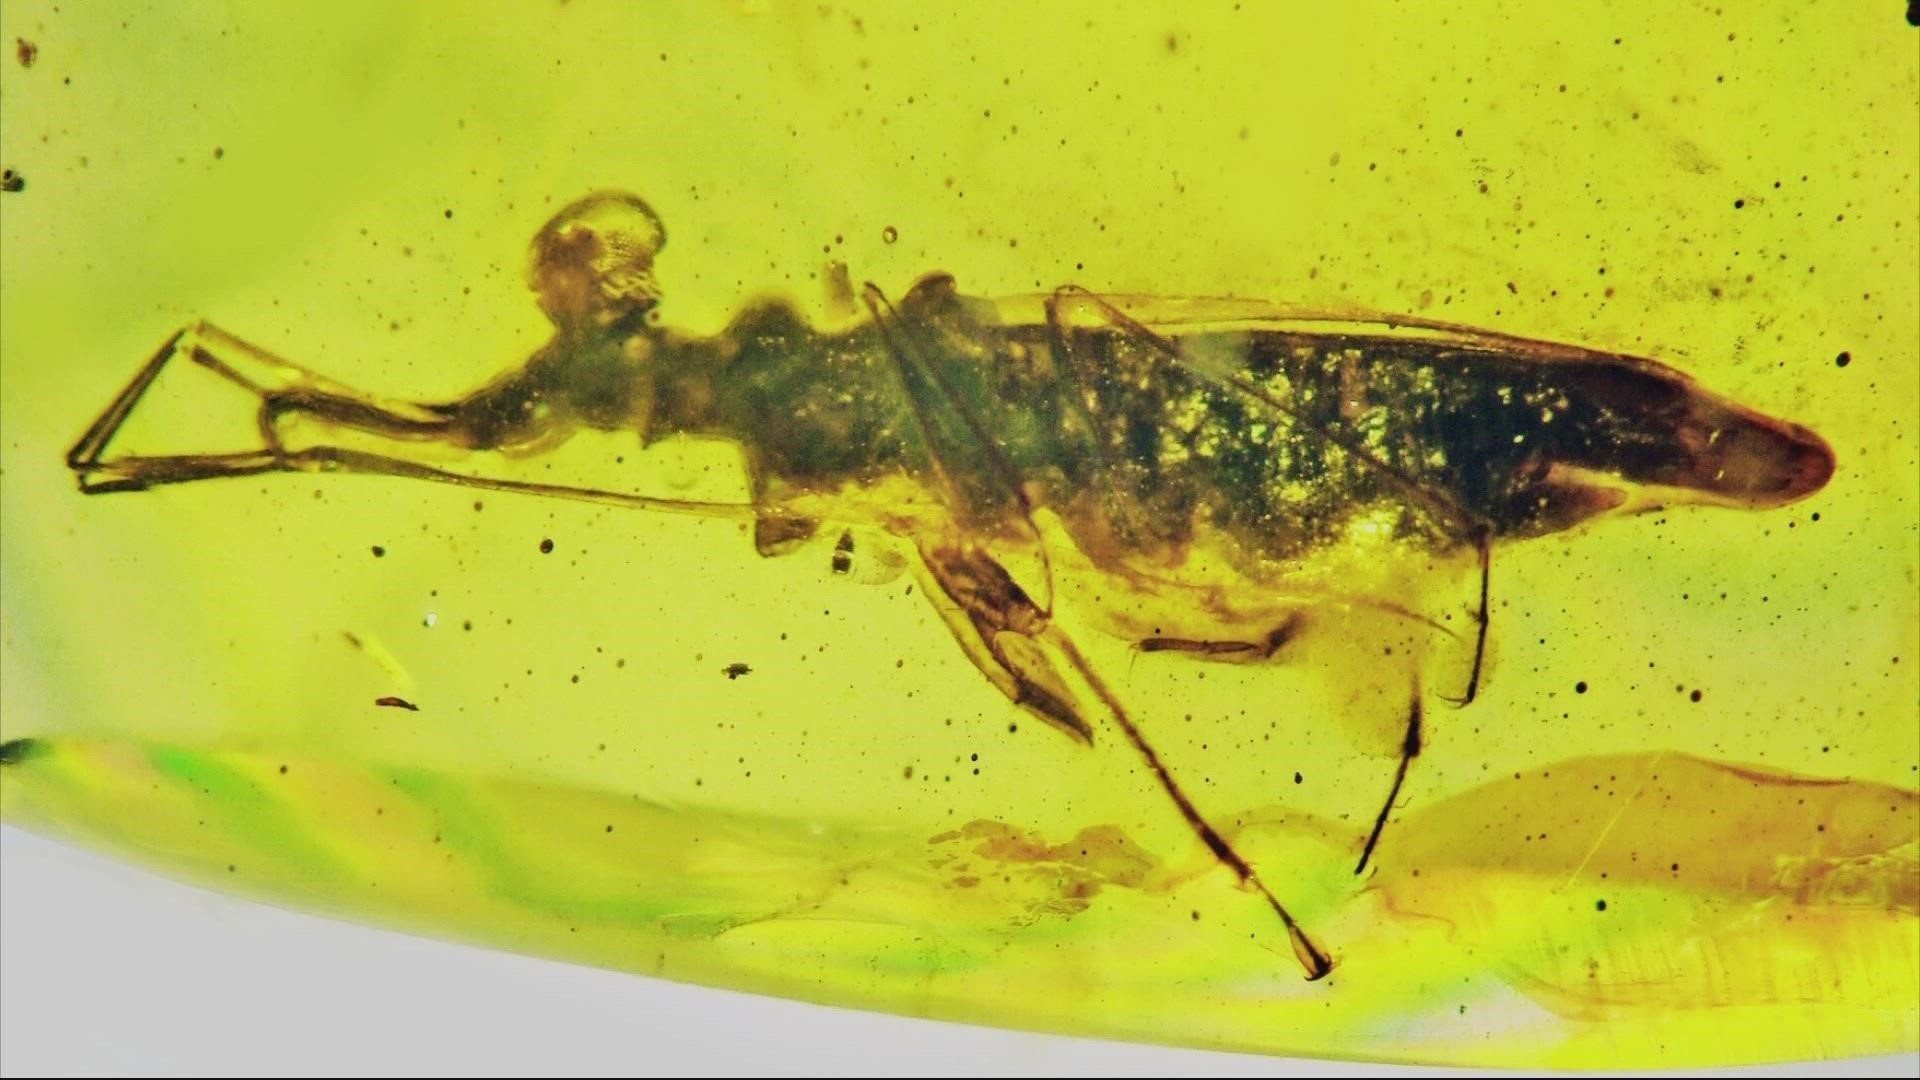 The insect is 100 million years old, preserved in fossilized tree resin or “amber.” An OSU researcher got to study and name the bug.